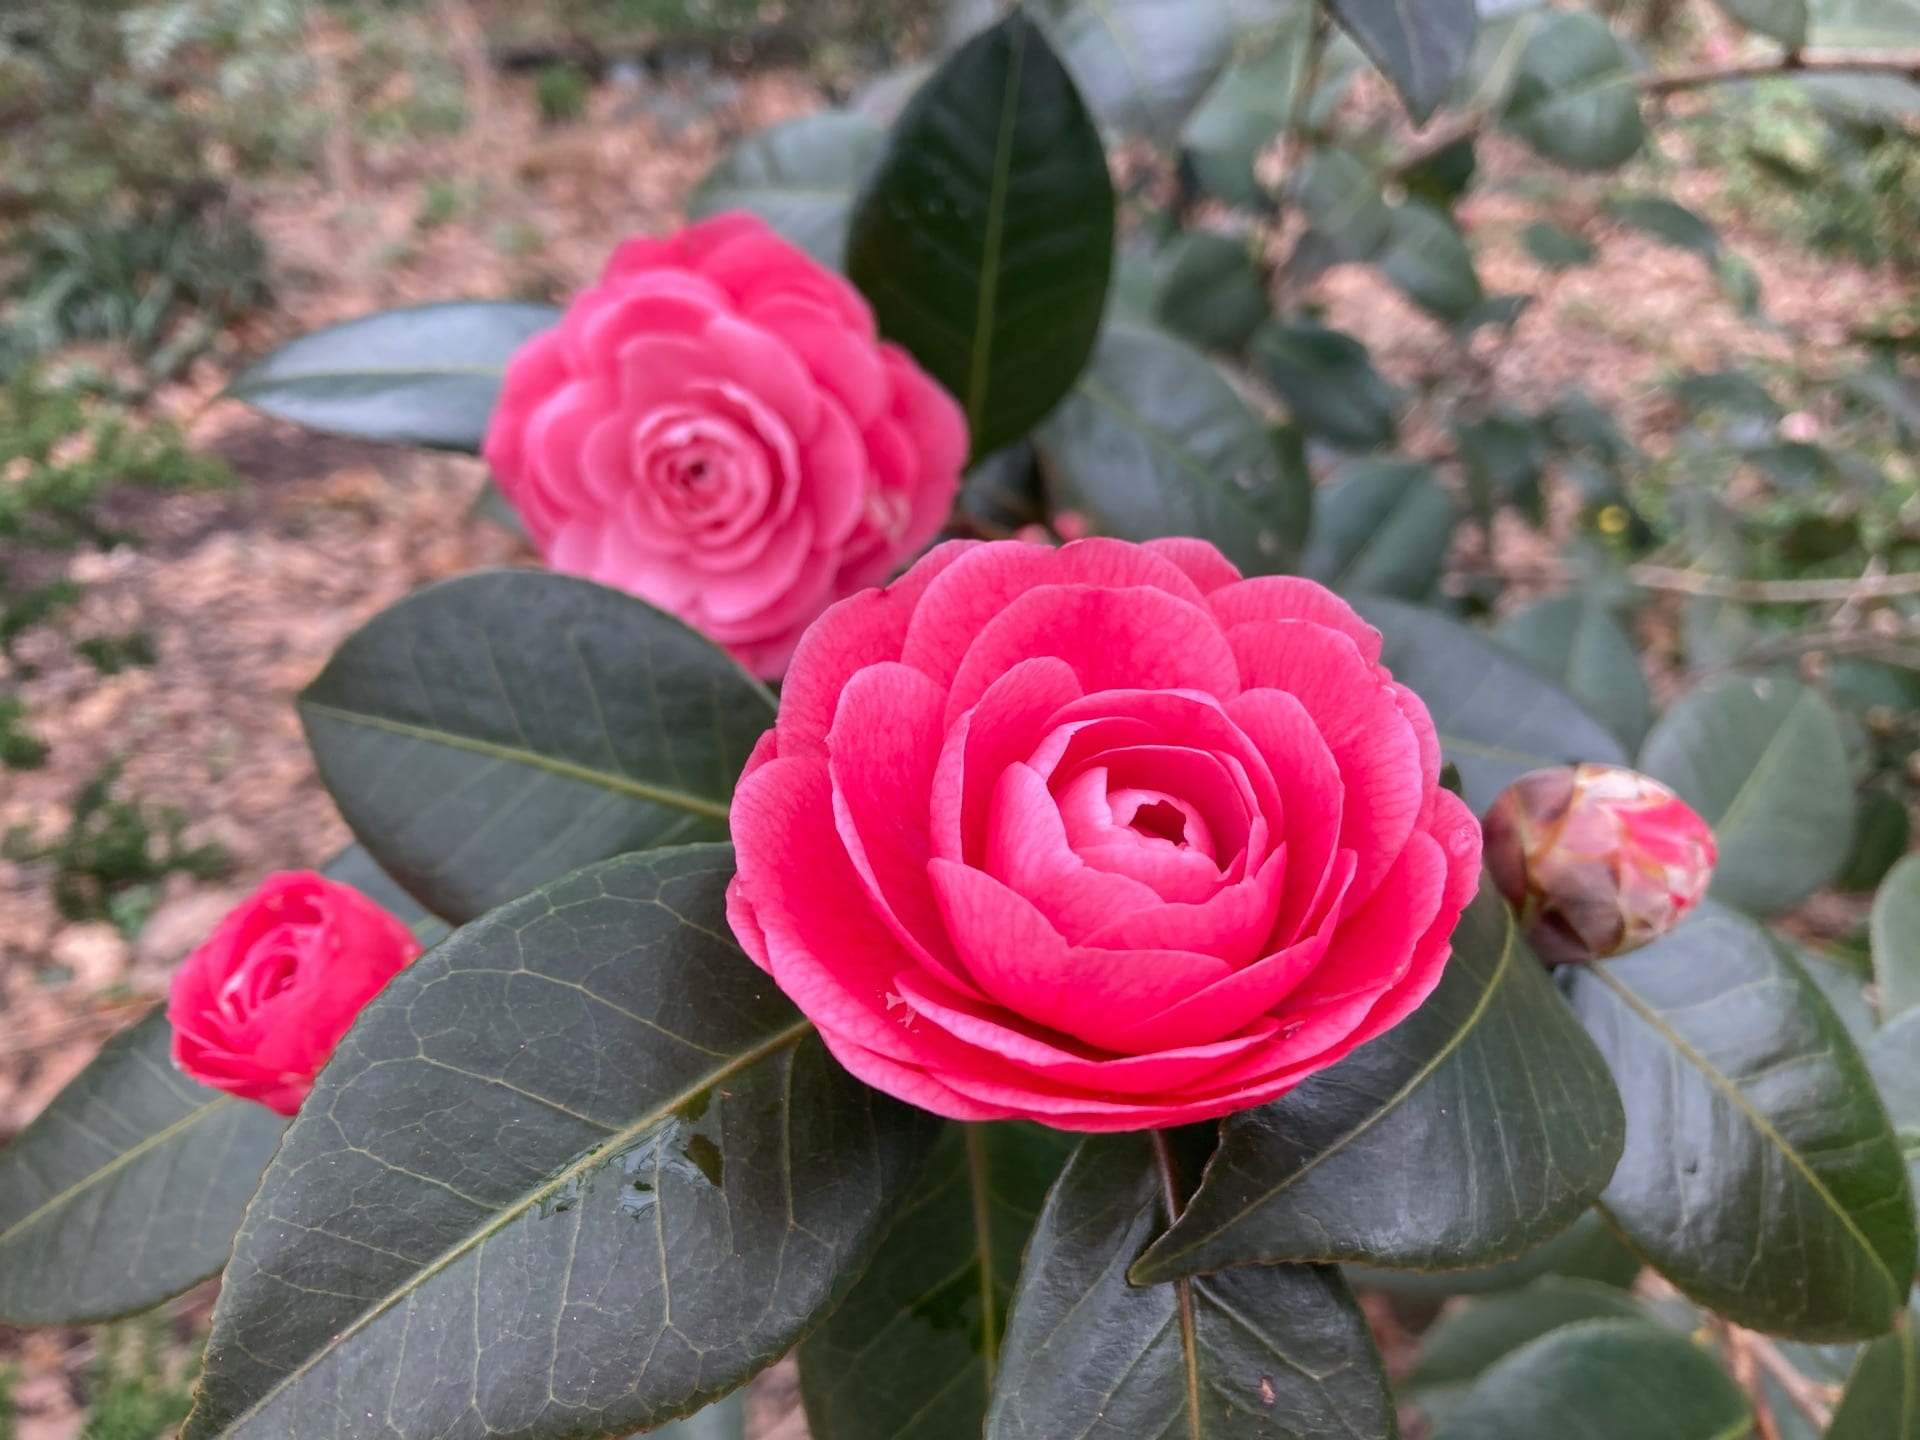 Camellia japonica 'April Kiss' flowers steal the show.